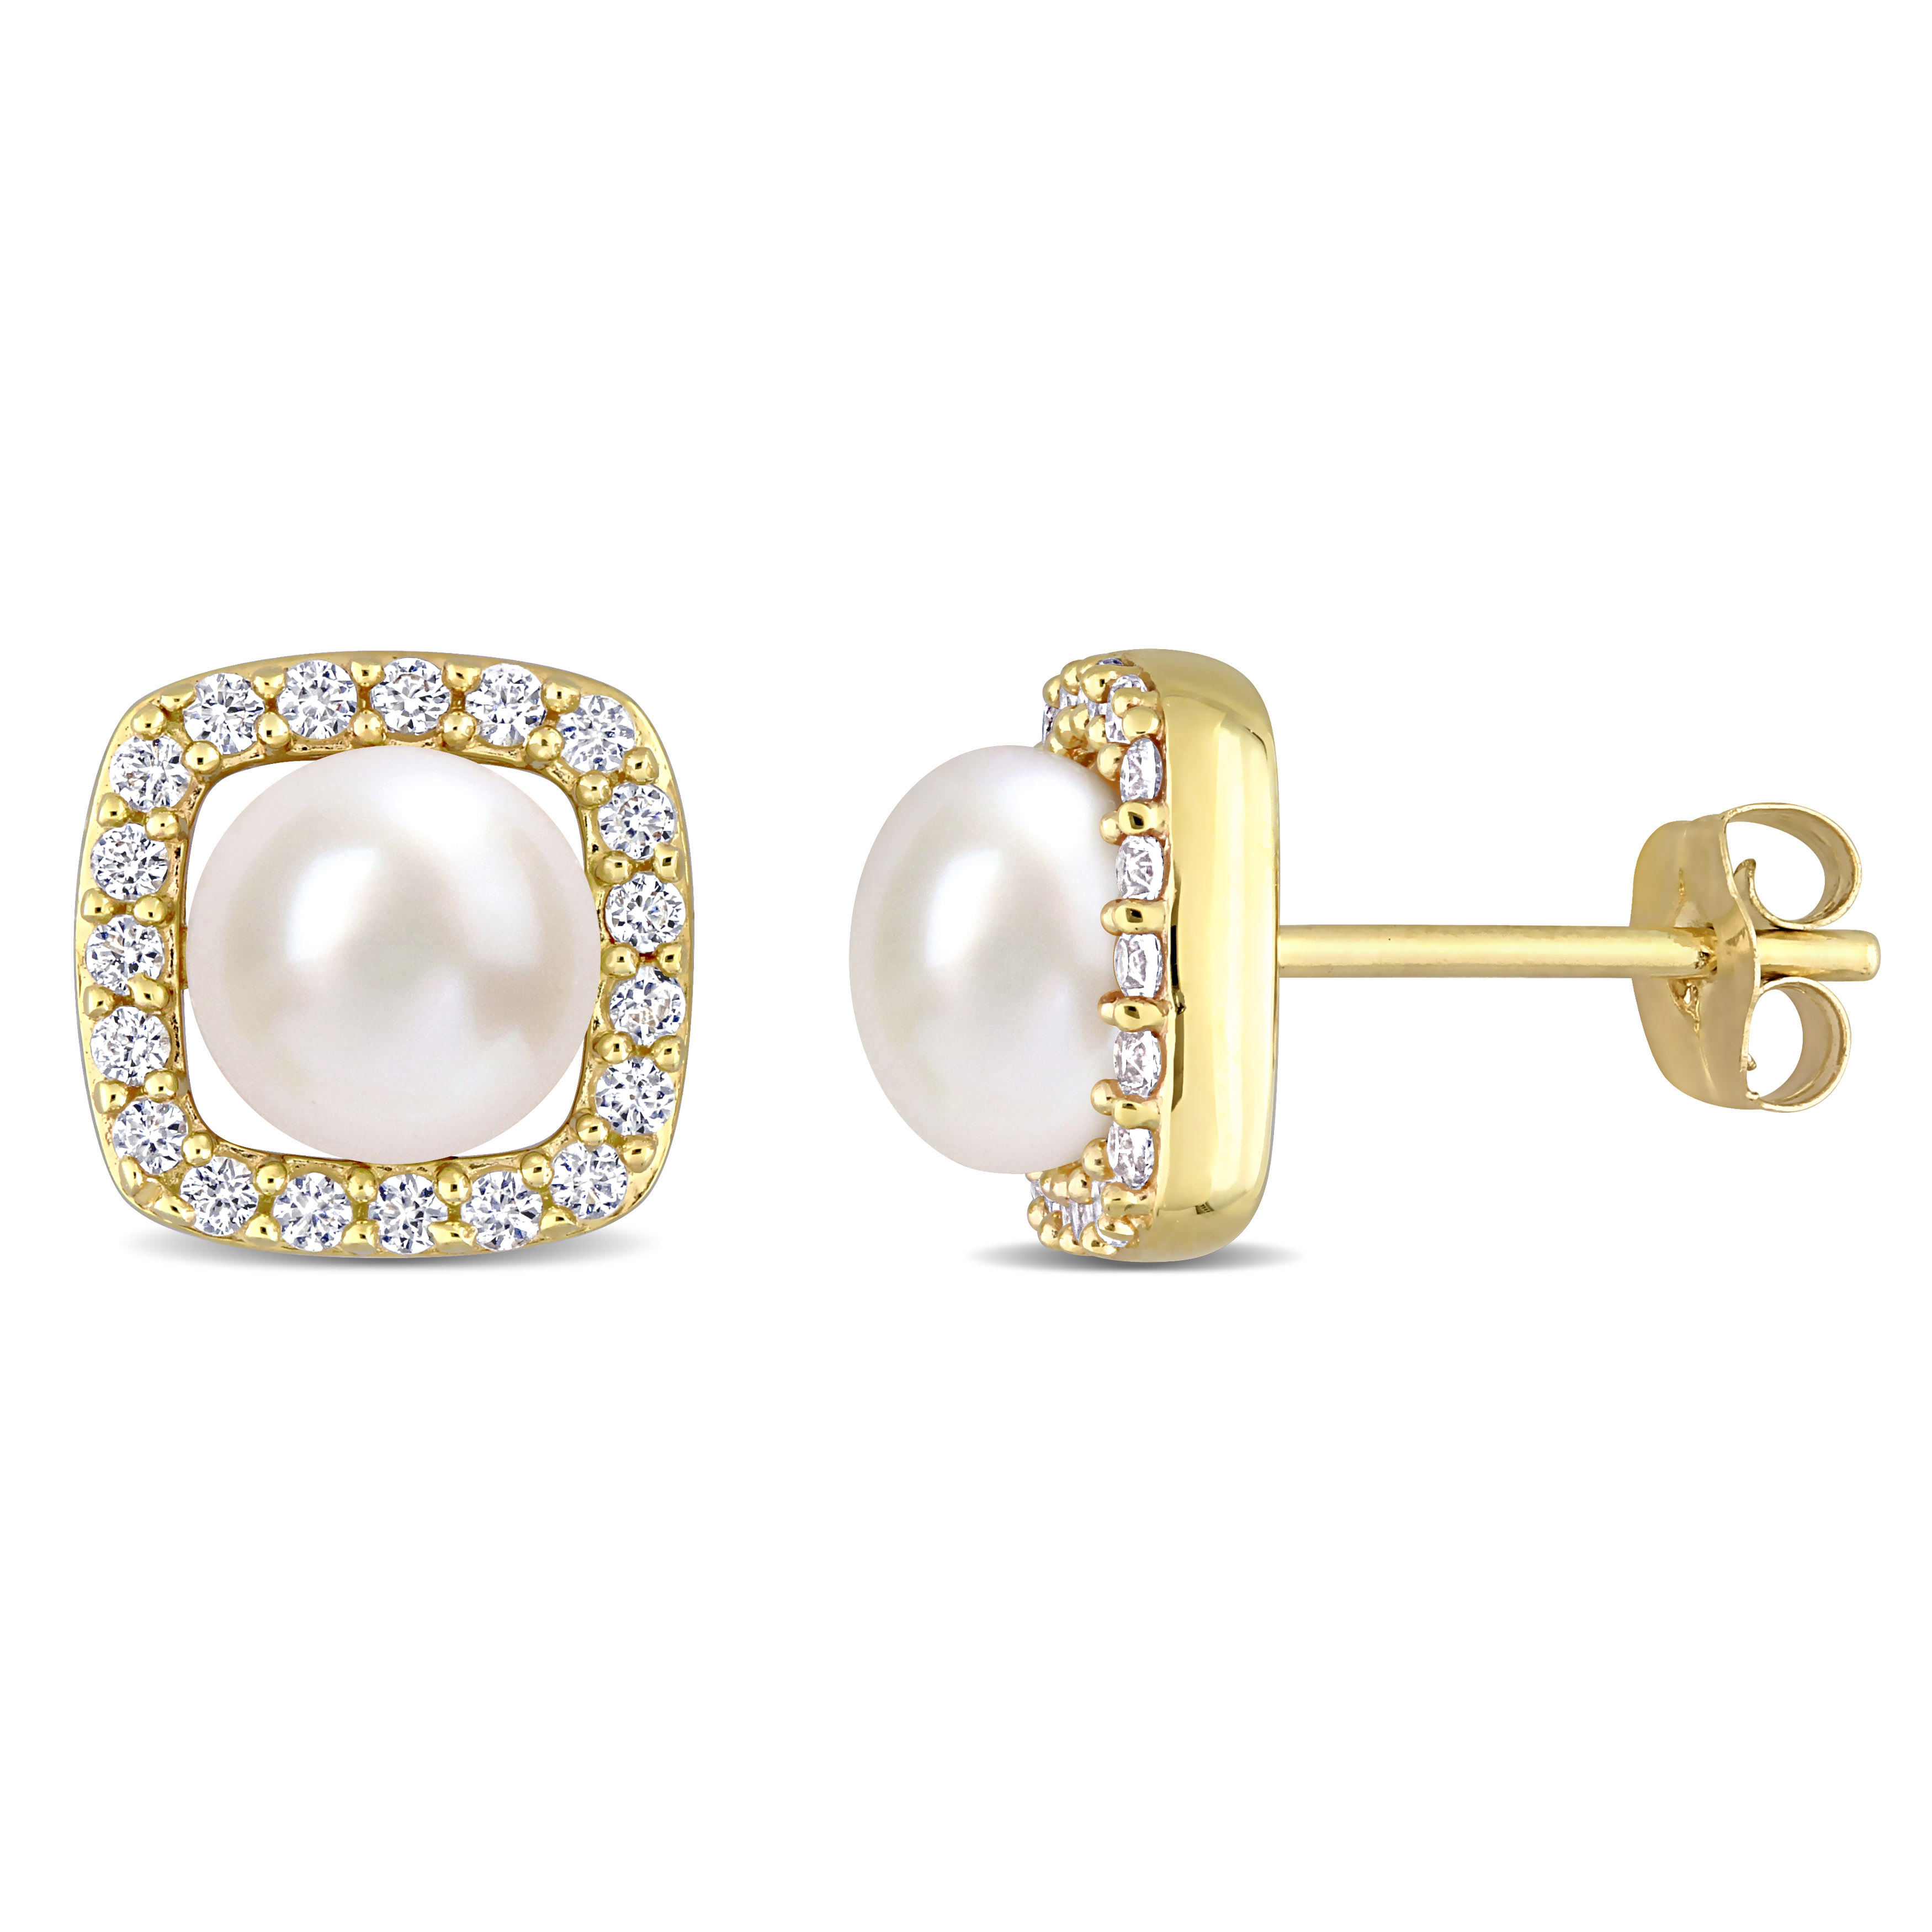 6 - 6.5 MM Cultured Freshwater Pearl and 3/8 CT TGW Created White Sapphire Halo Earrings in 10k Yellow Gold